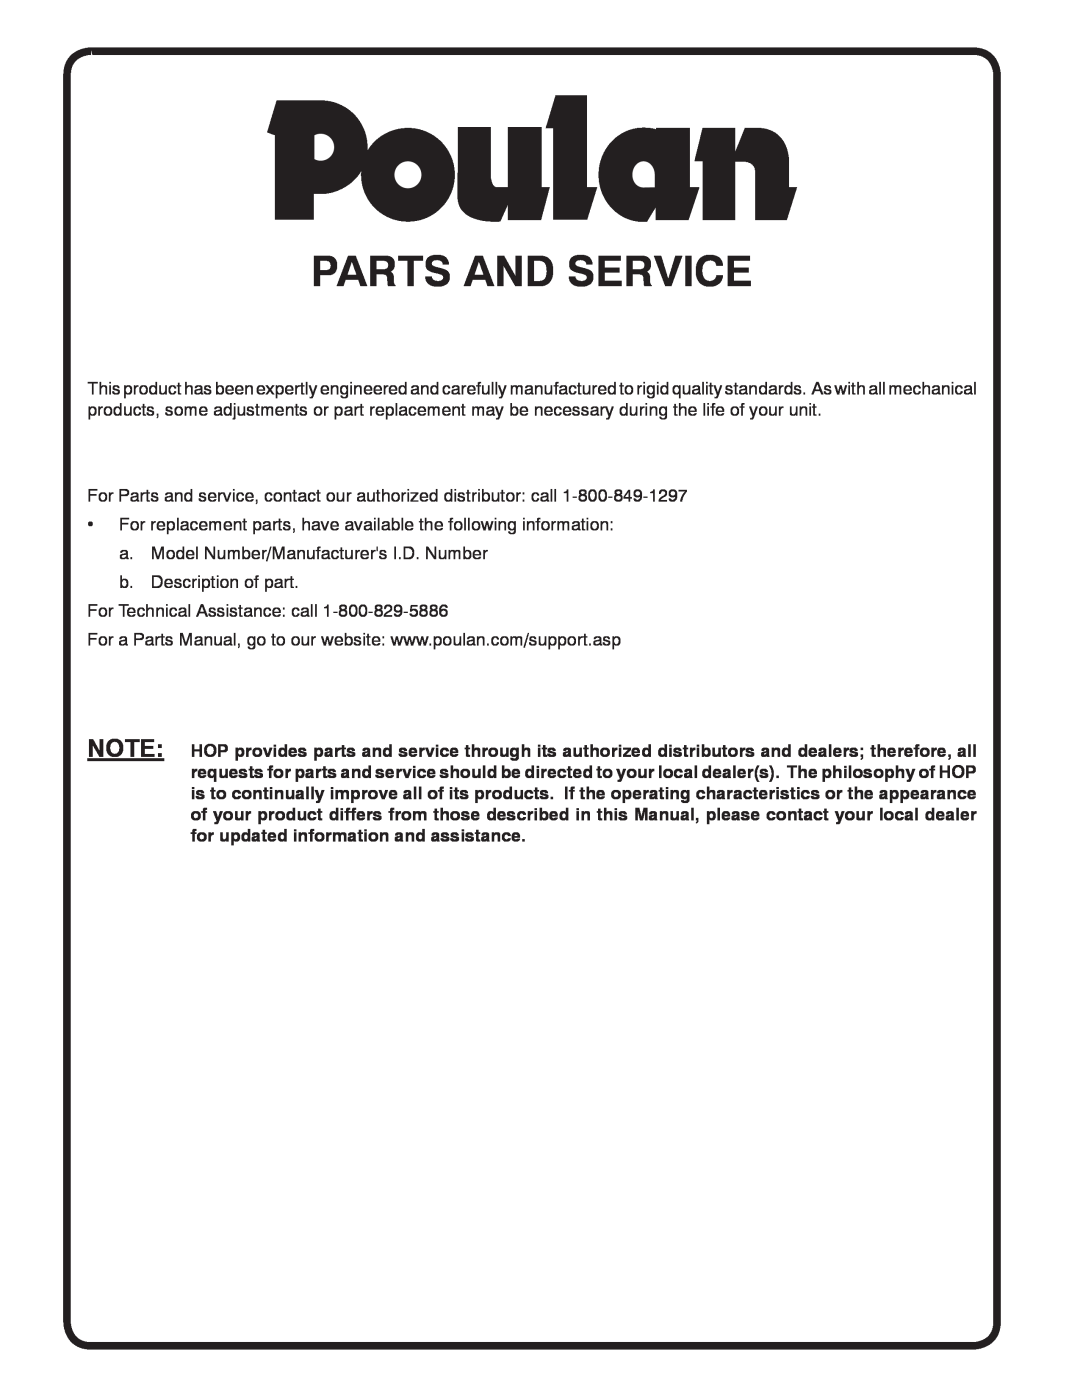 Poulan VF550 manual Parts And Service 